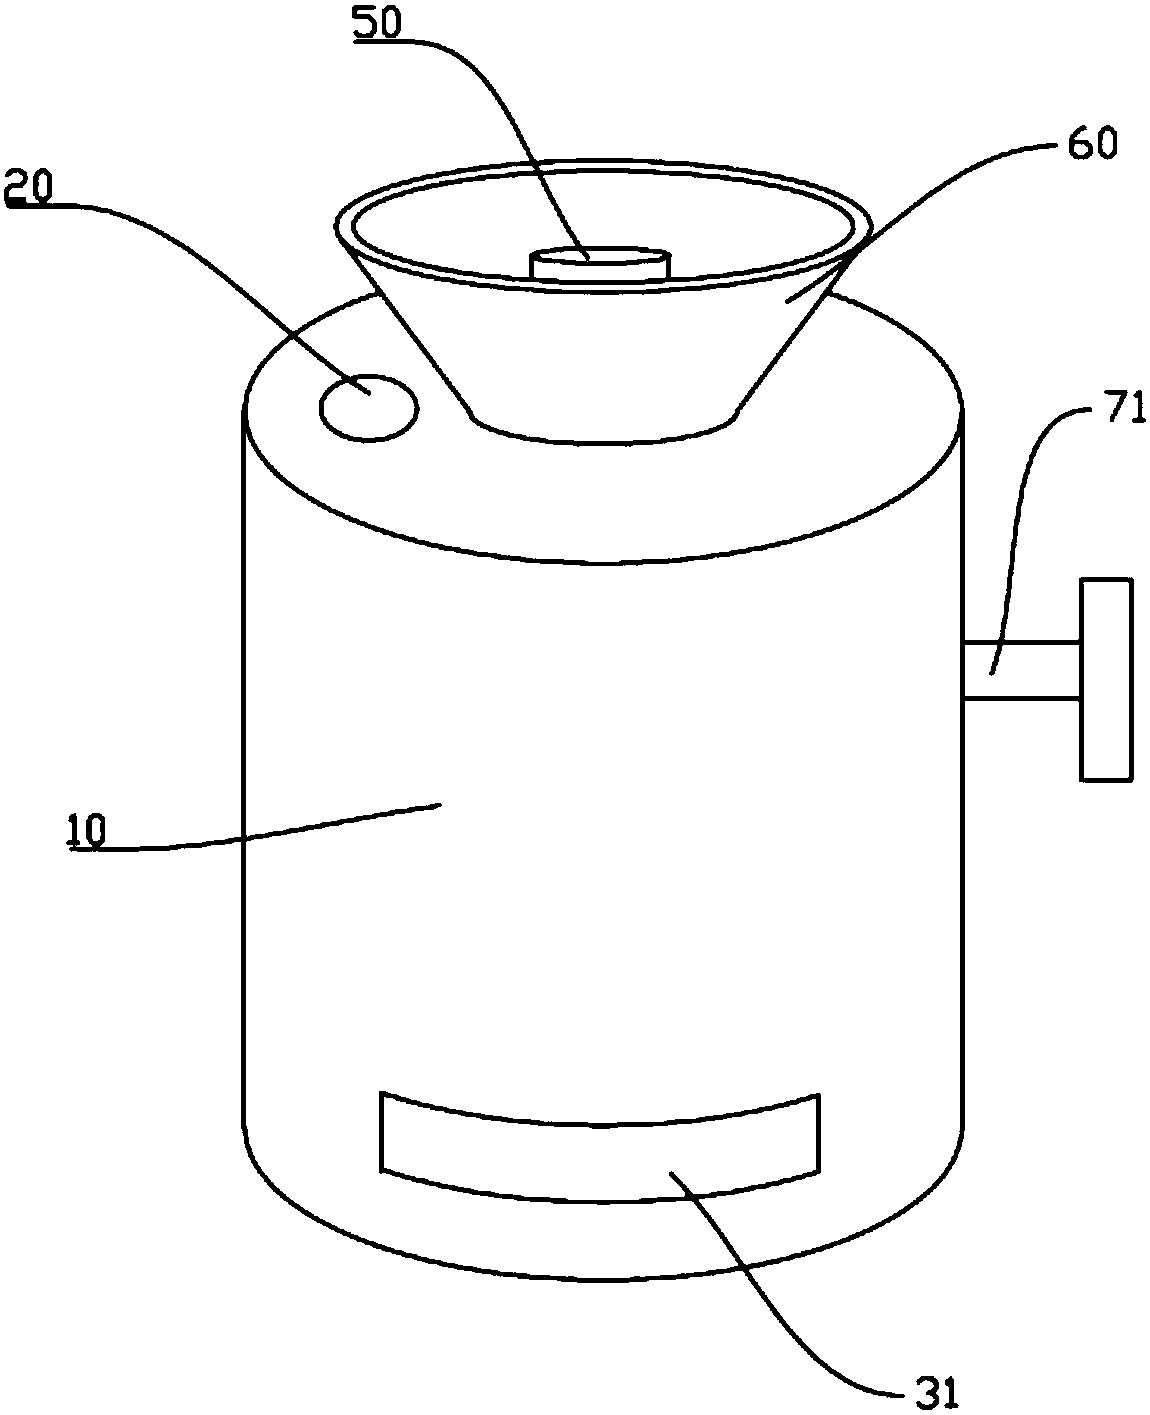 Incense burner capable of recycling and processing incense ash